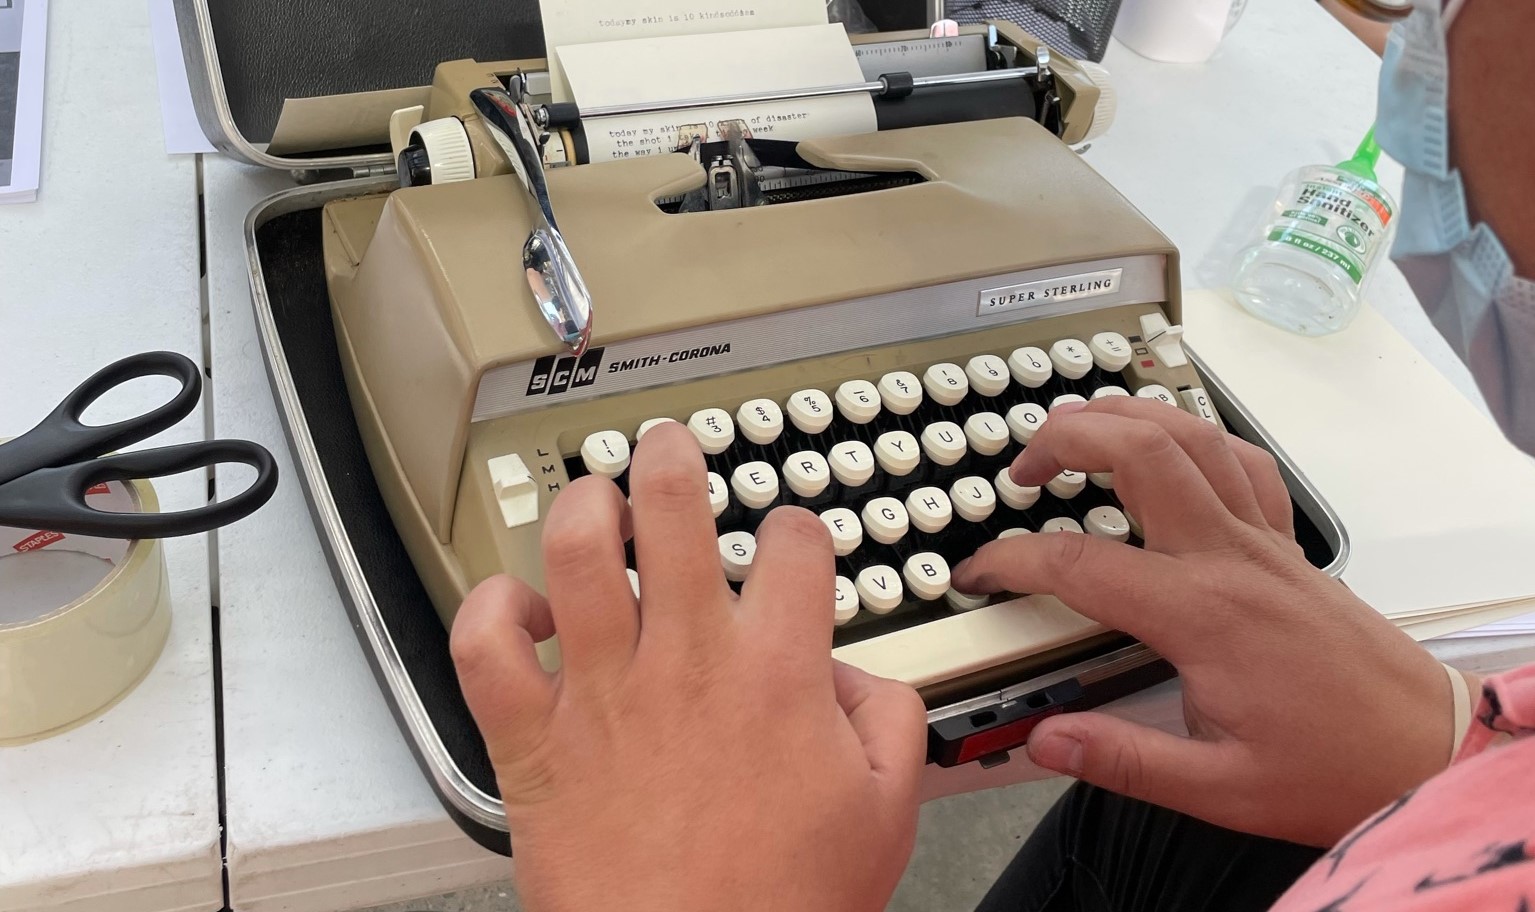 A person types on a manual typewriter / Photo by Sally Ball